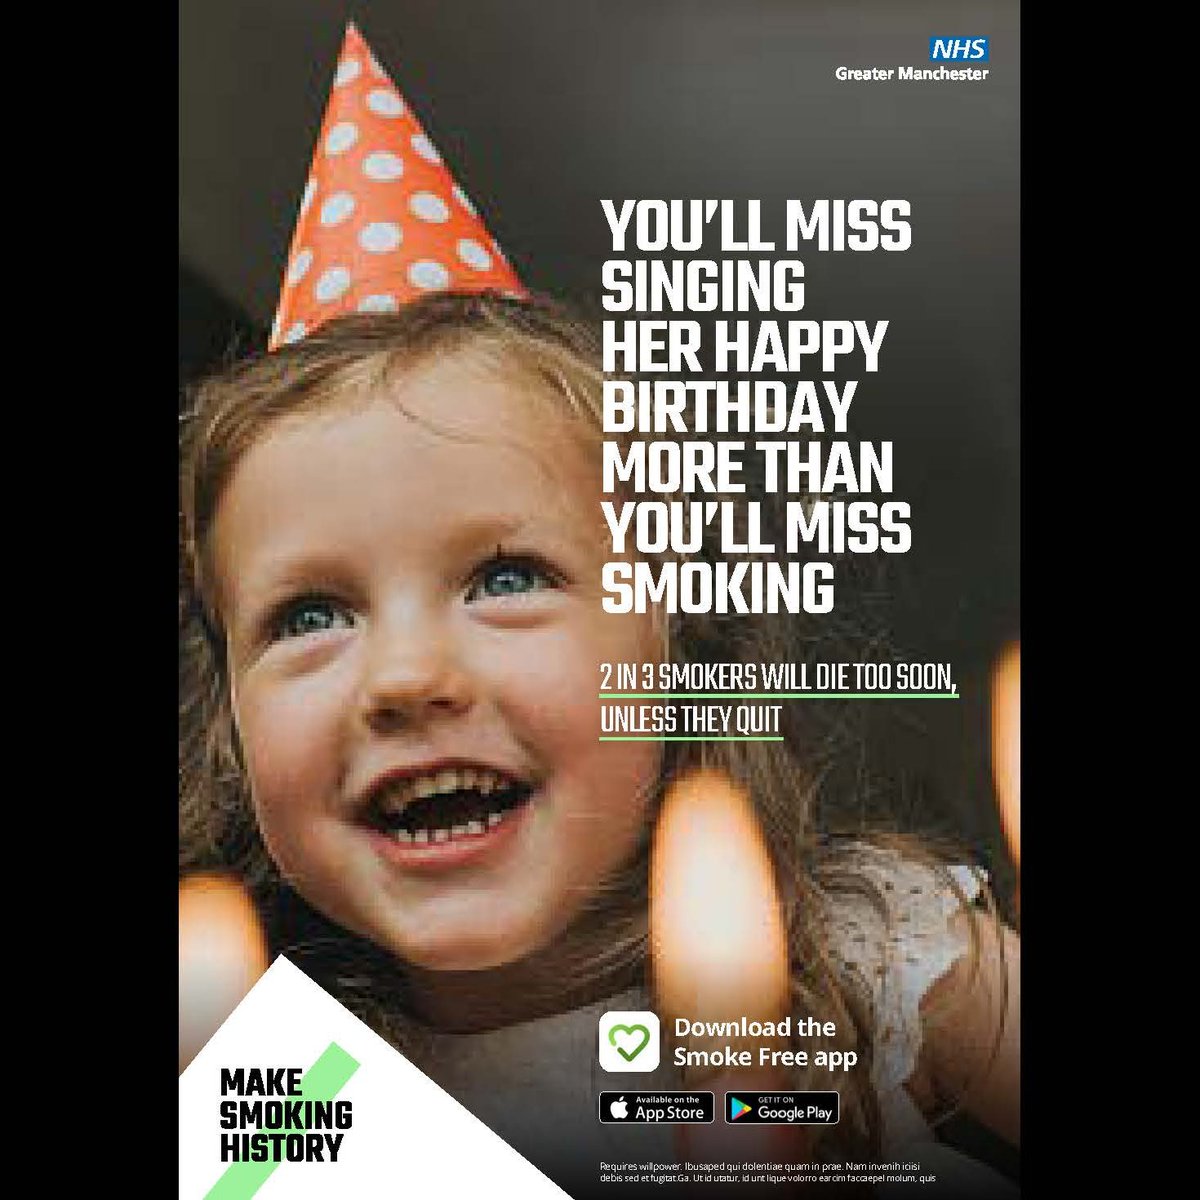 Don’t miss out on those special life moments, give yourself the gift of a smoke free future.

A new campaign “What will you miss” has just been launched and will be seen on billboards, TV and social media over the next month.

#Makesmokinghistory #Whatwillyoumiss #thesmokefreeapp